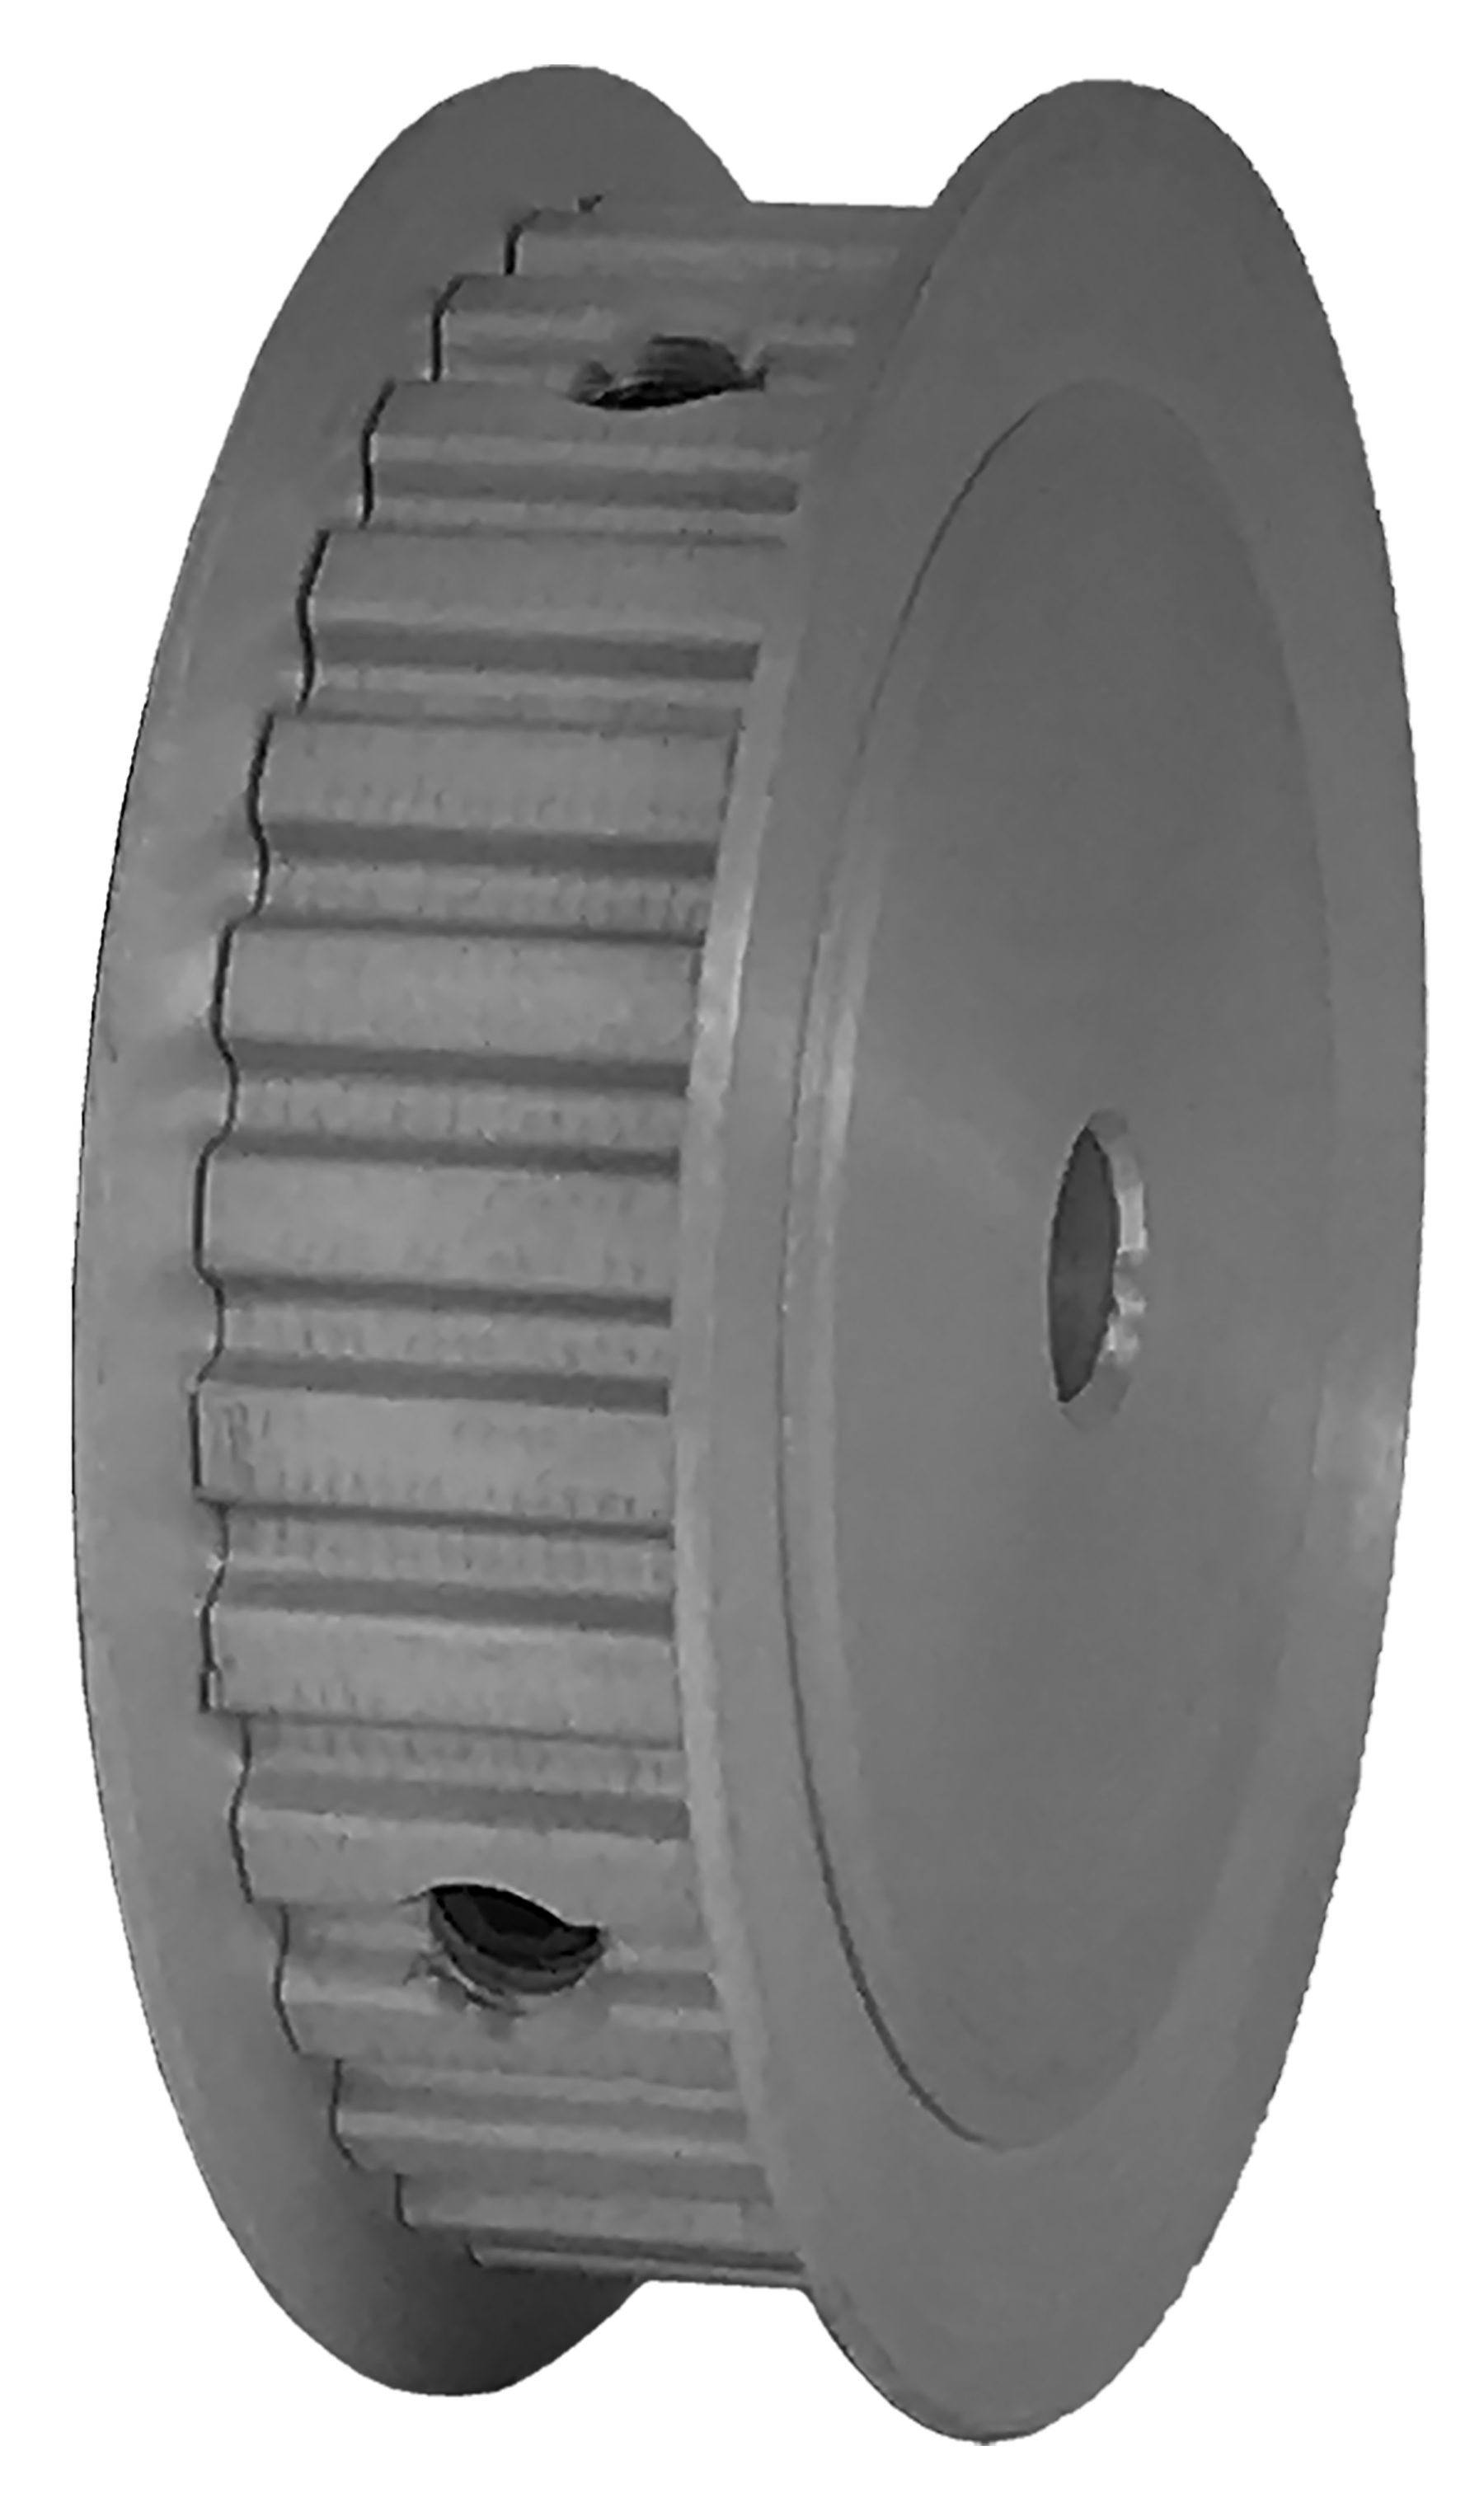 30XL037-3FA3 - Aluminum Imperial Pitch Pulleys